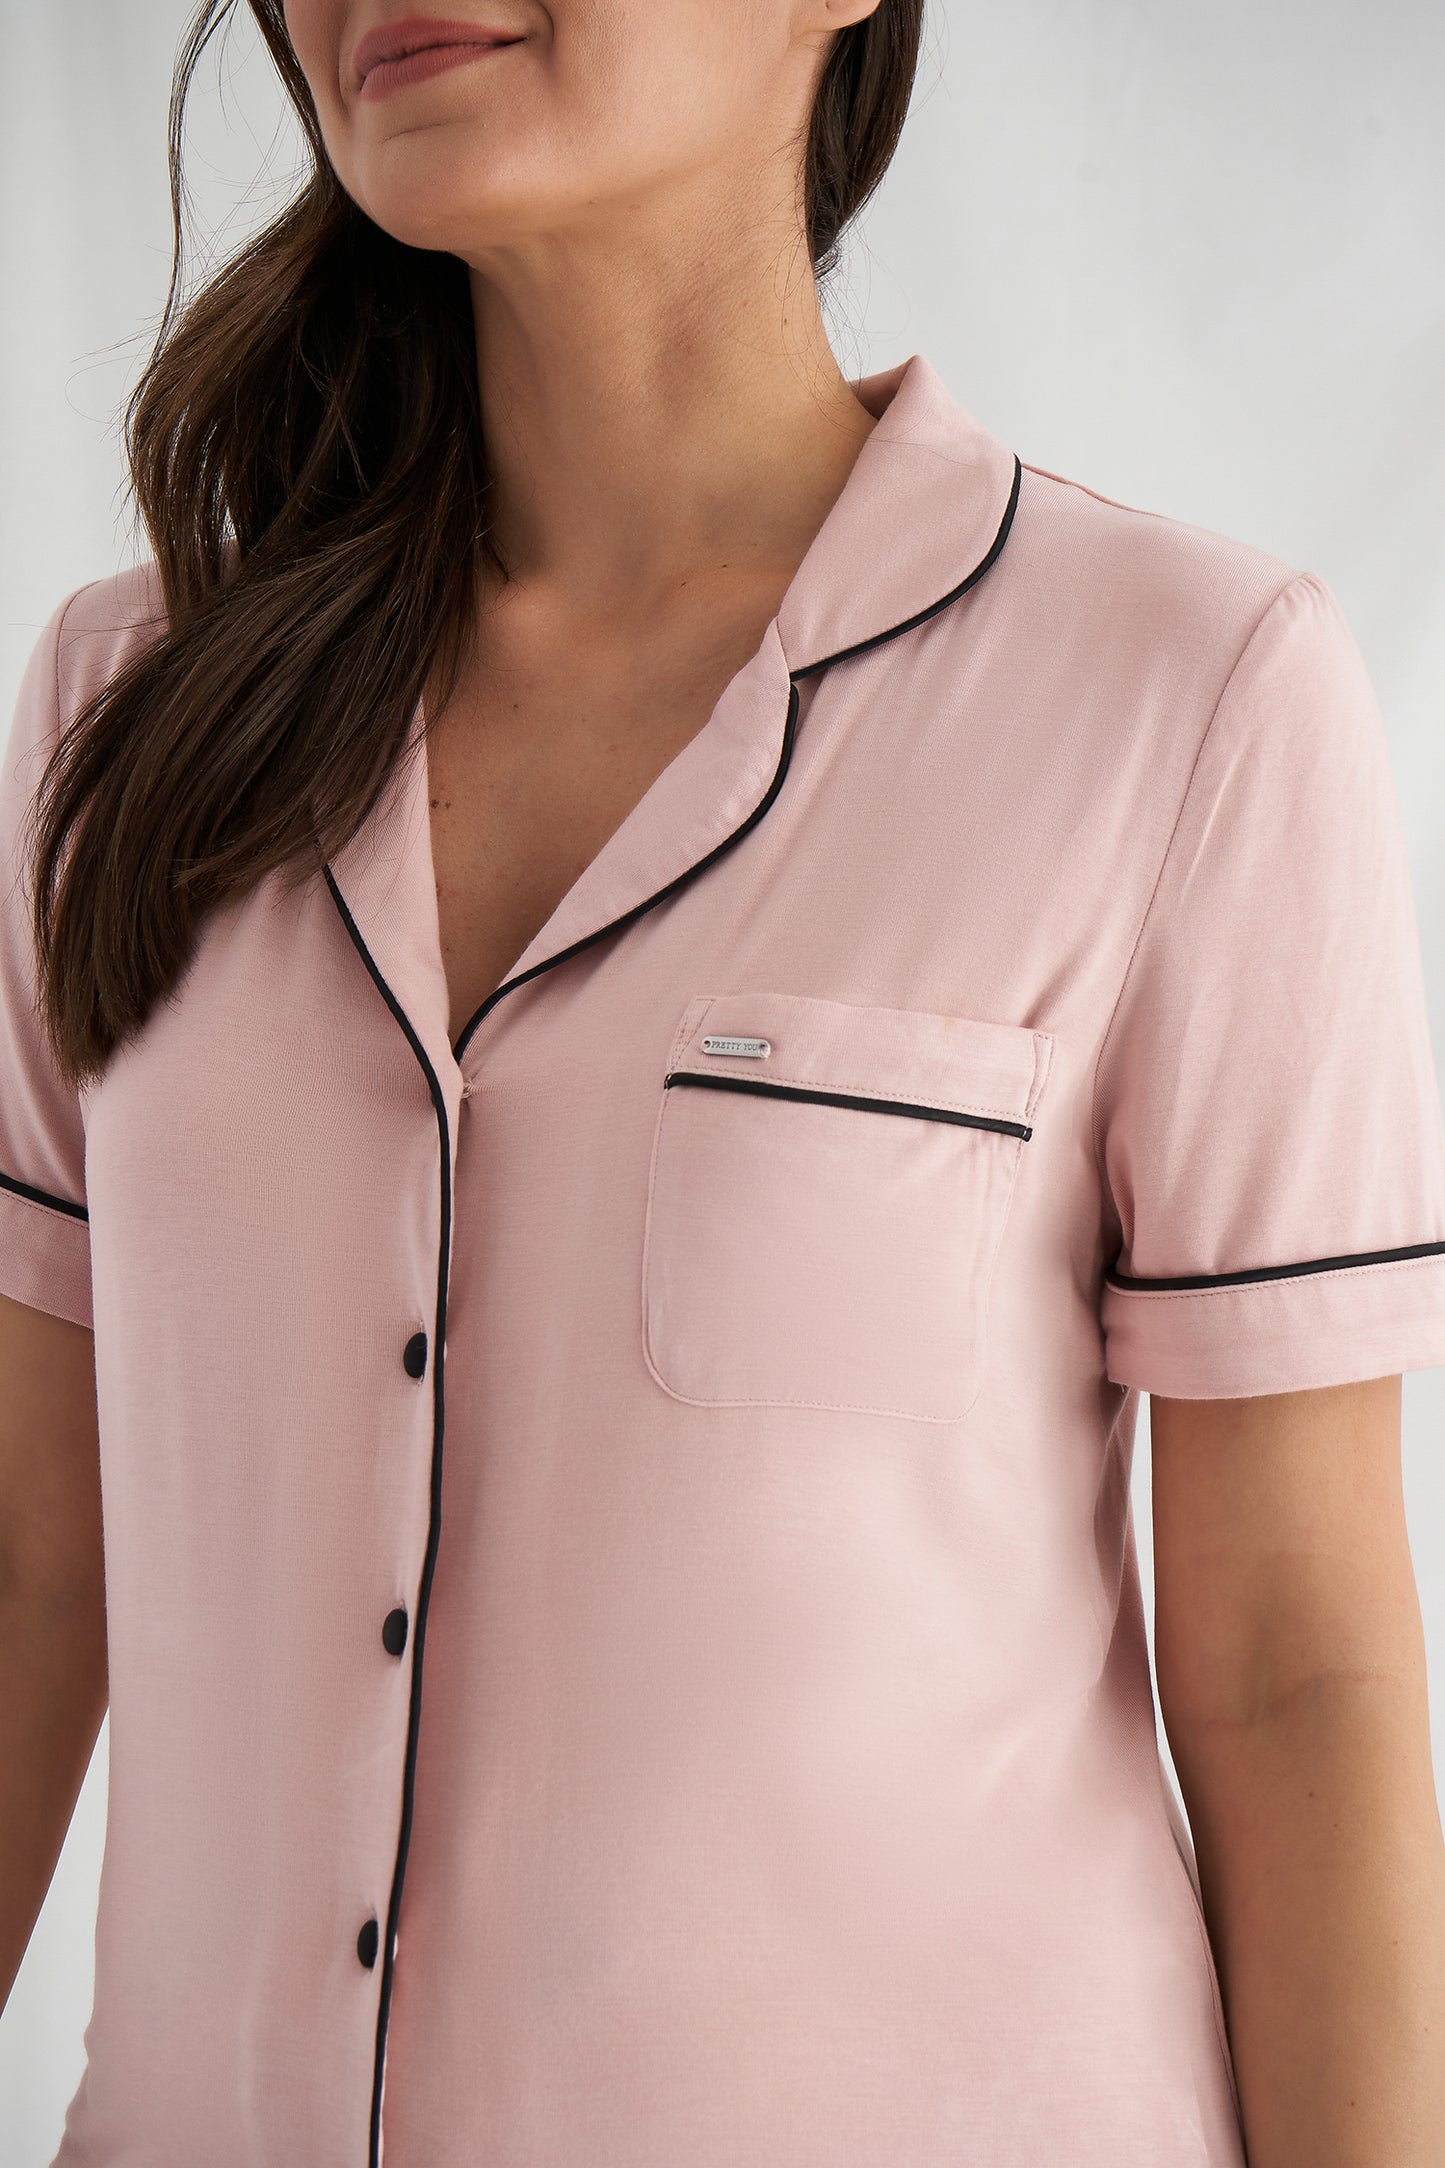 
                  
                    Women's Bamboo Shirt Short Pyjama Set in Pink with a revere collar and contrasting piping and satin bow from Pretty You London
                  
                